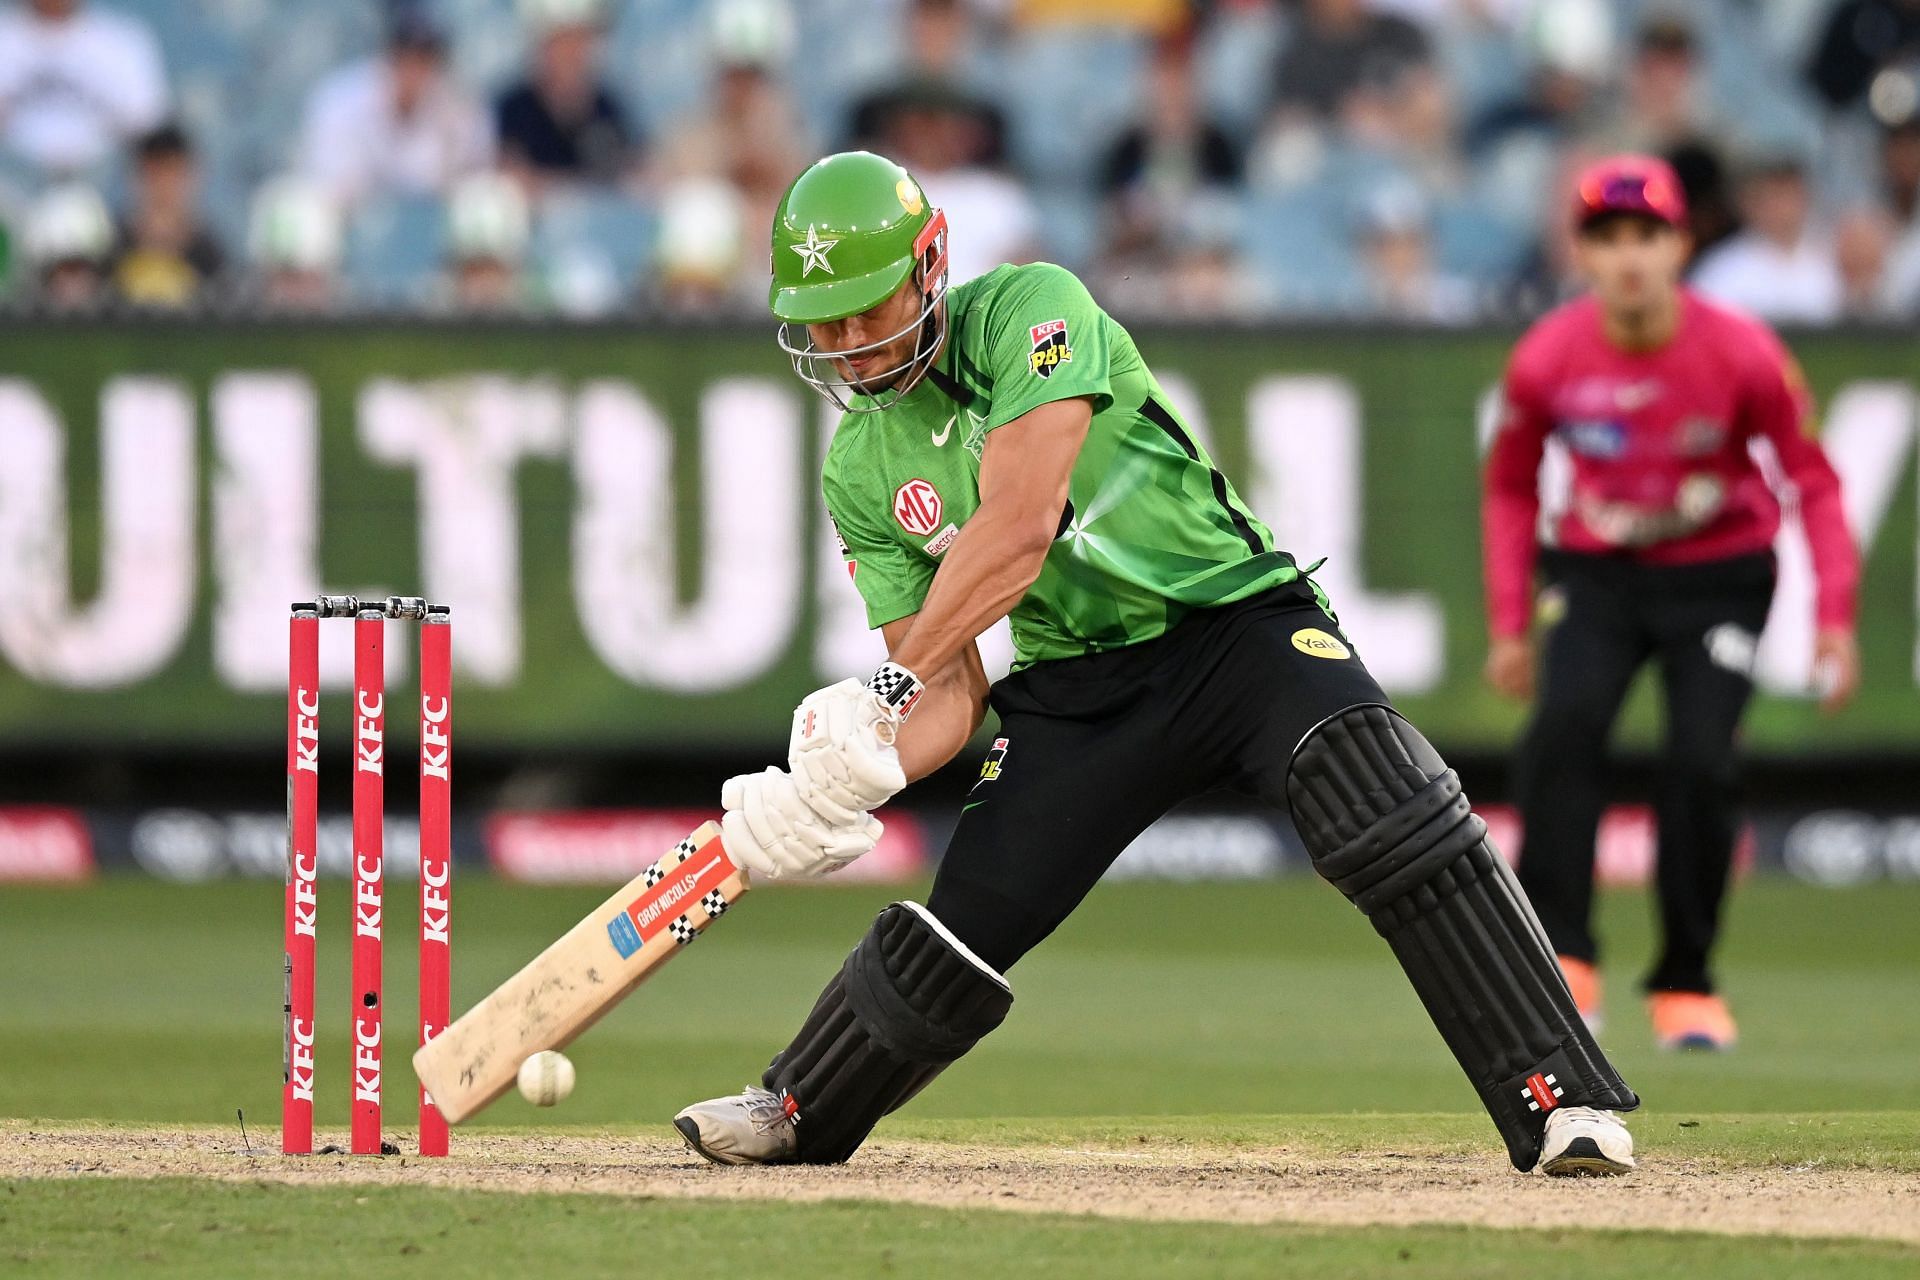 Marcus Stoinis is one of the most destructive finishers going around at the moment